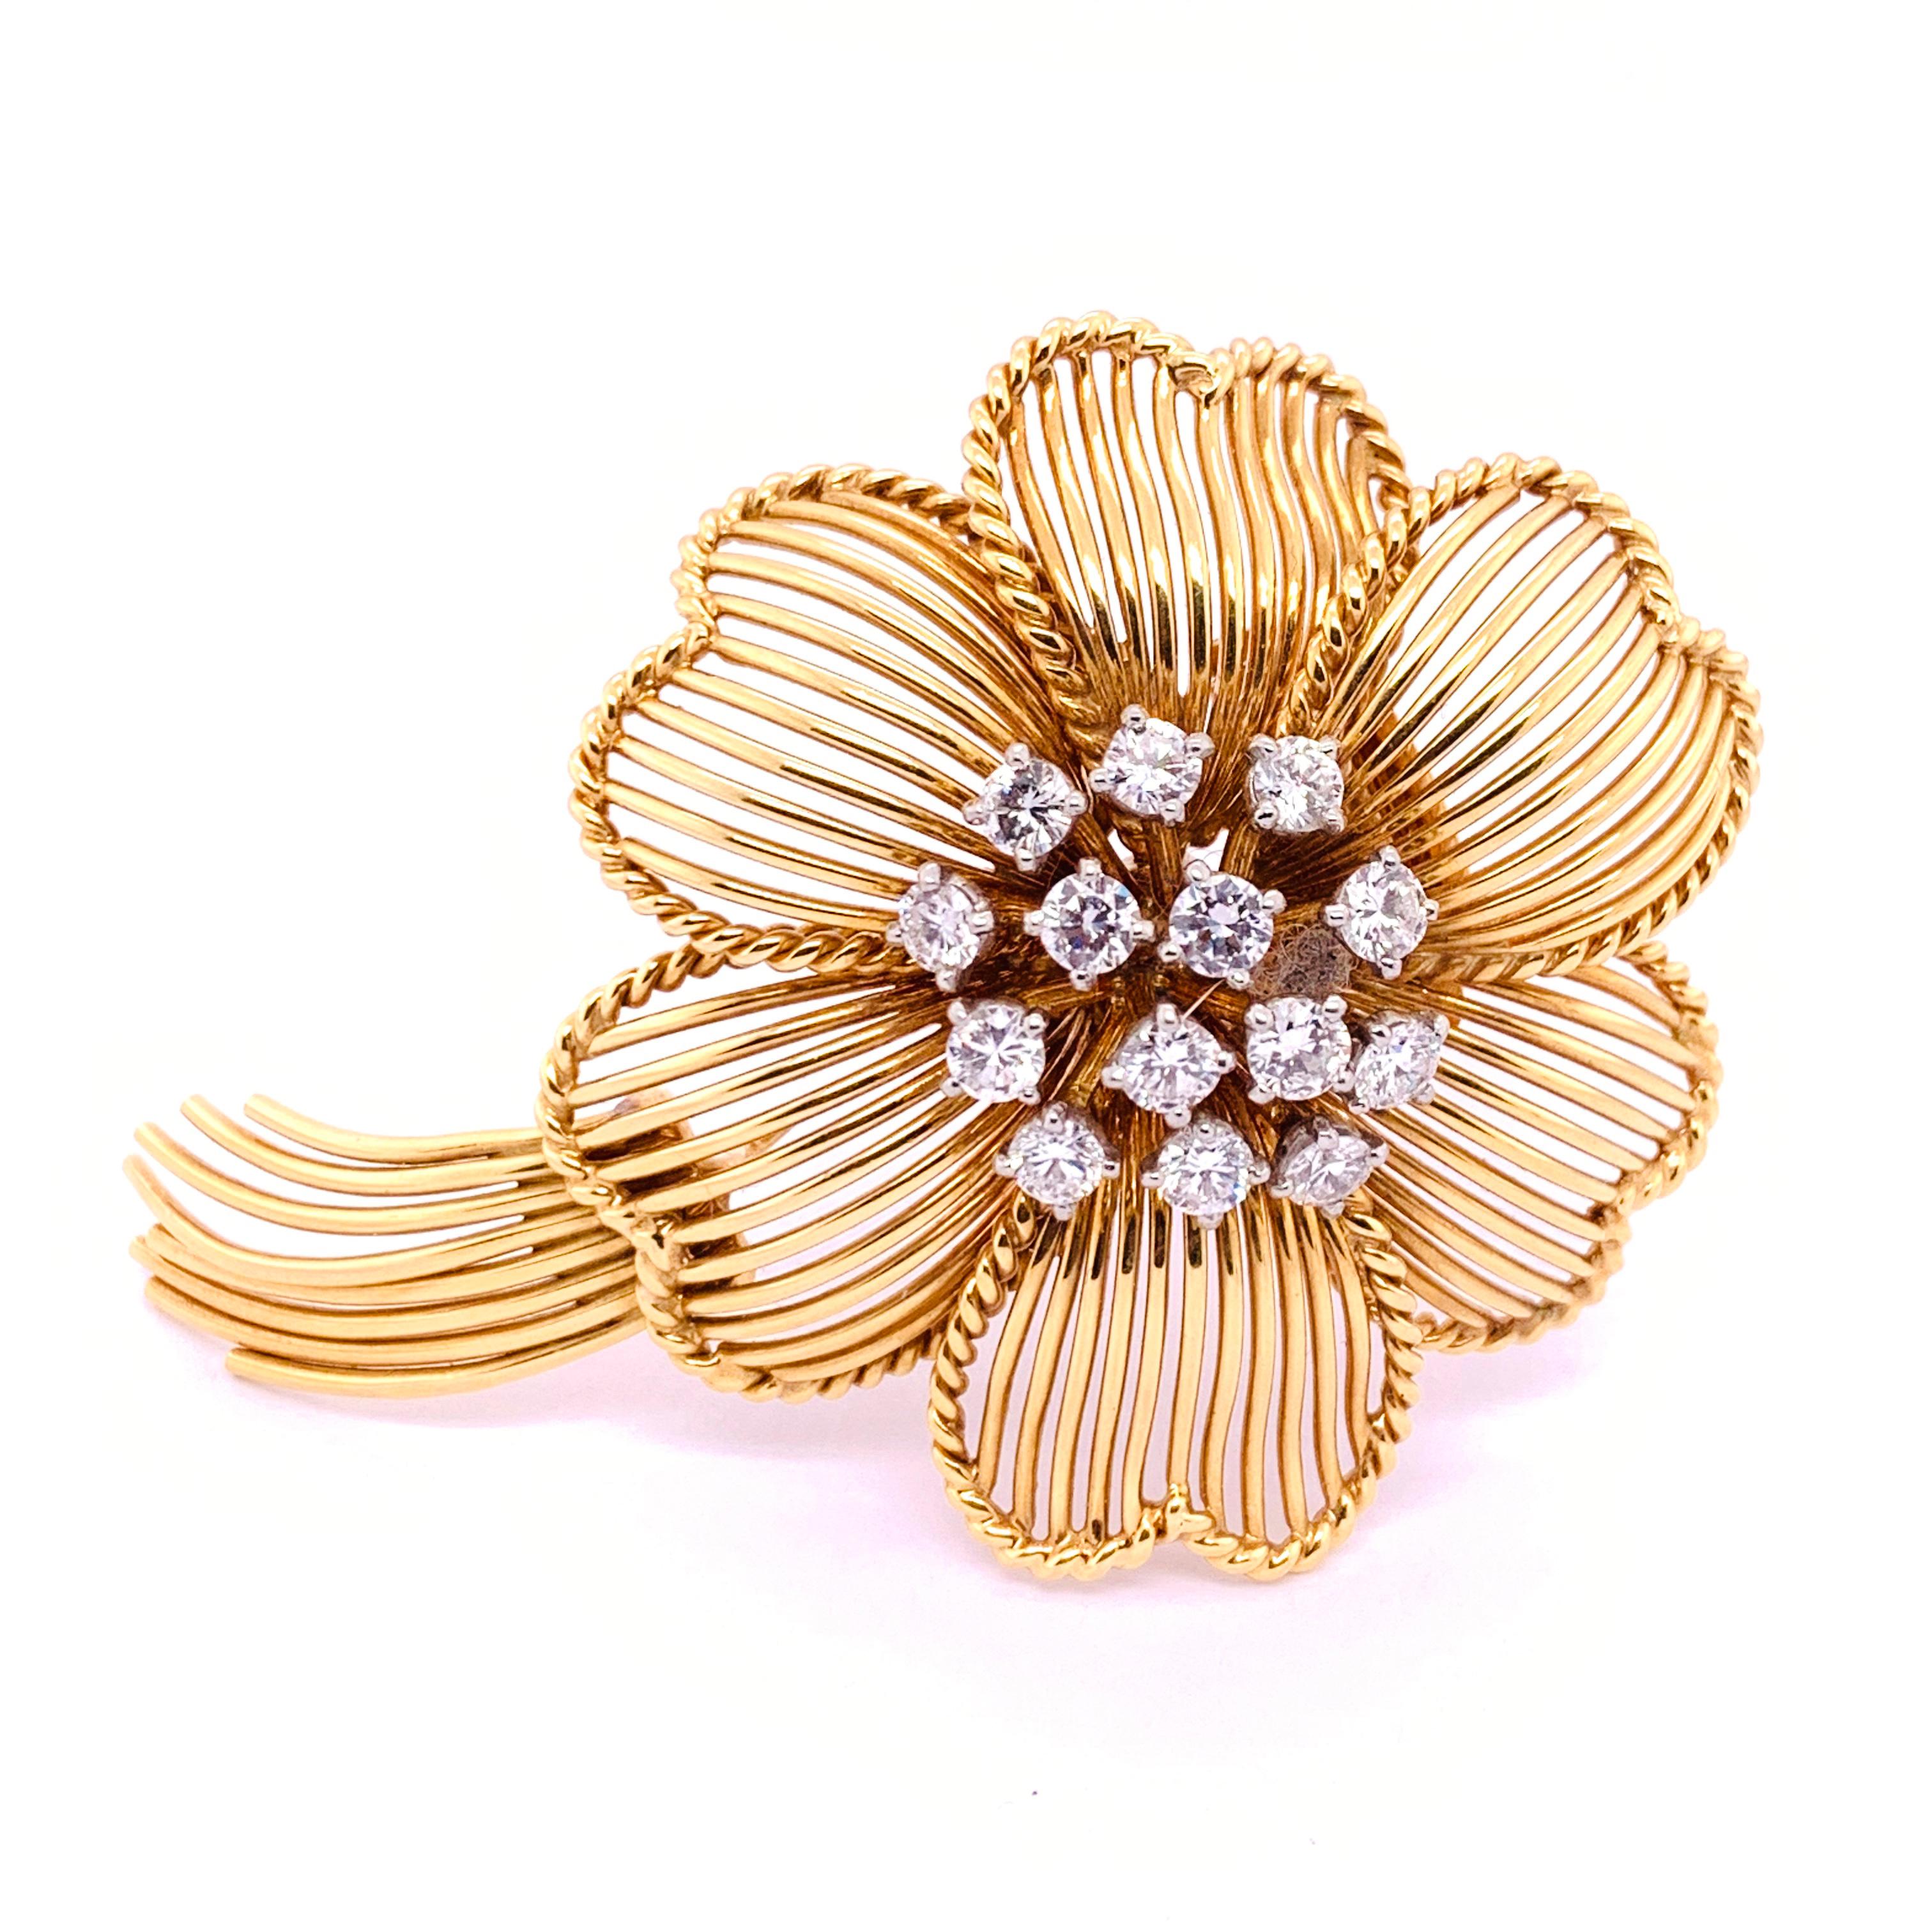 A Cartier gold and diamond flower brooch, comprising a cluster of diamonds to the centre with open work gold wire petals and stem. Estimated total diamond weight 2.10cts. Mounted in 18ct gold. Signed Cartier with French marks. Circa 1960.